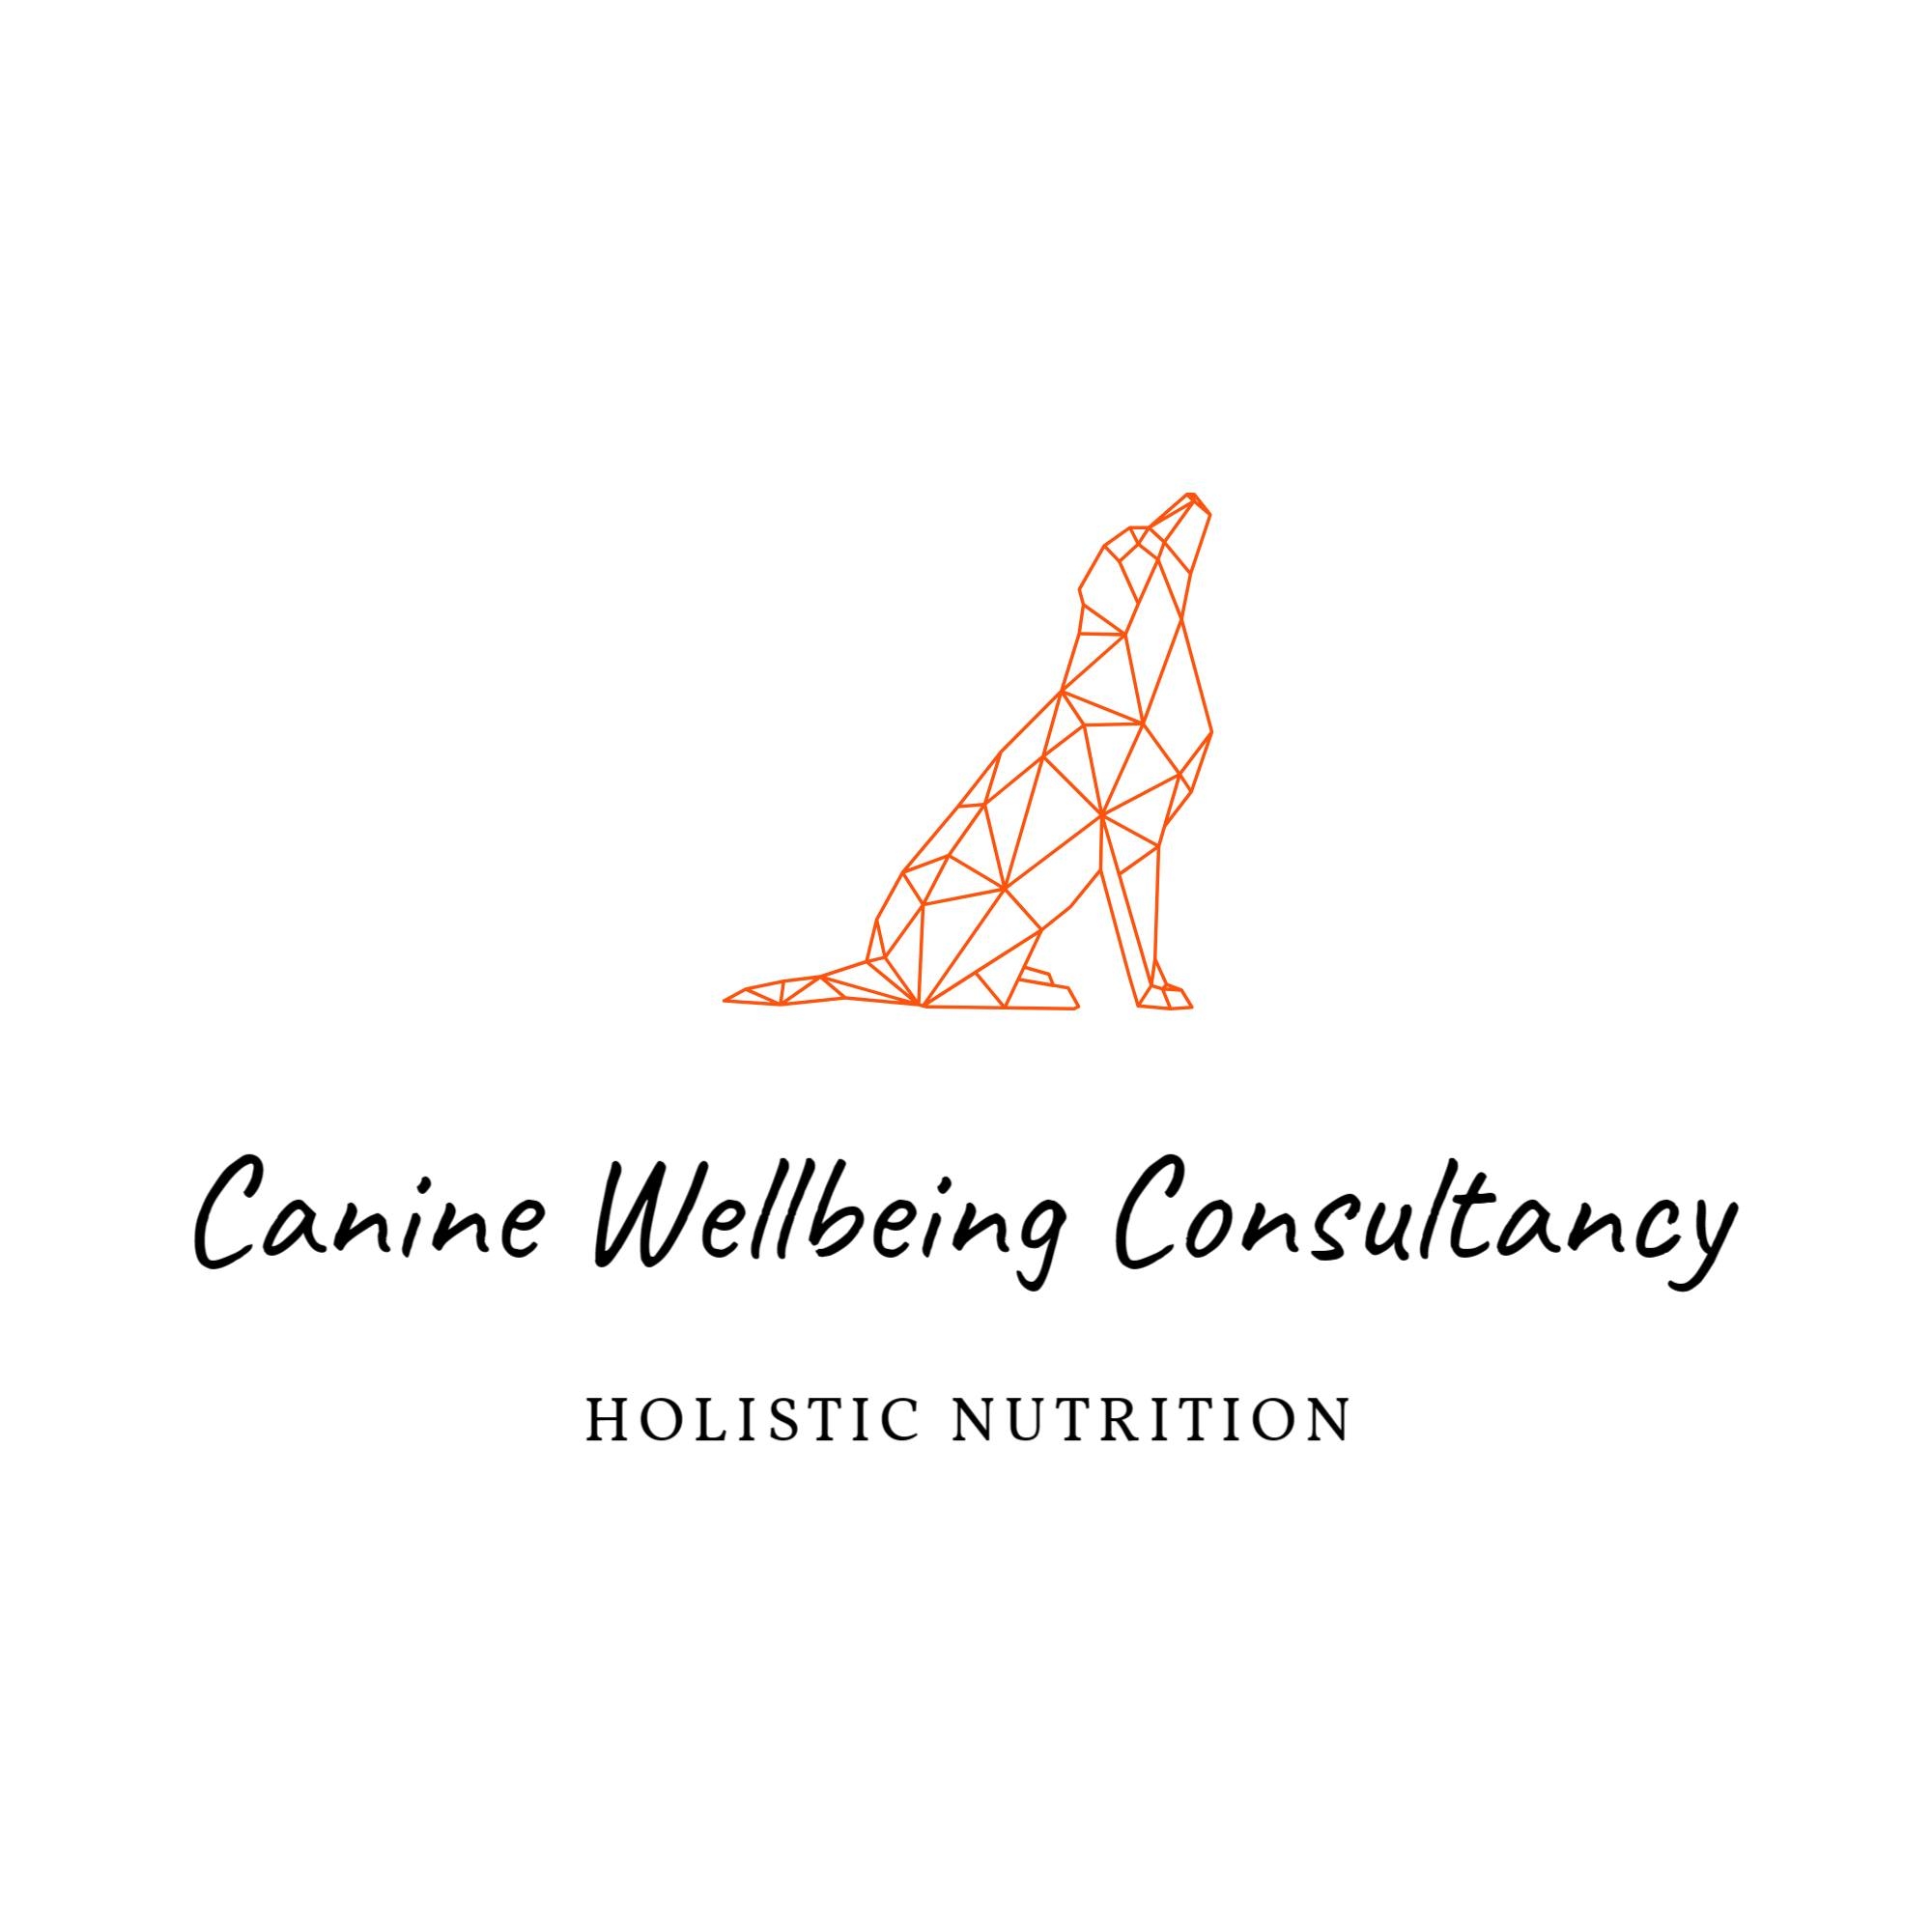 Canine Wellbeing Consultancy